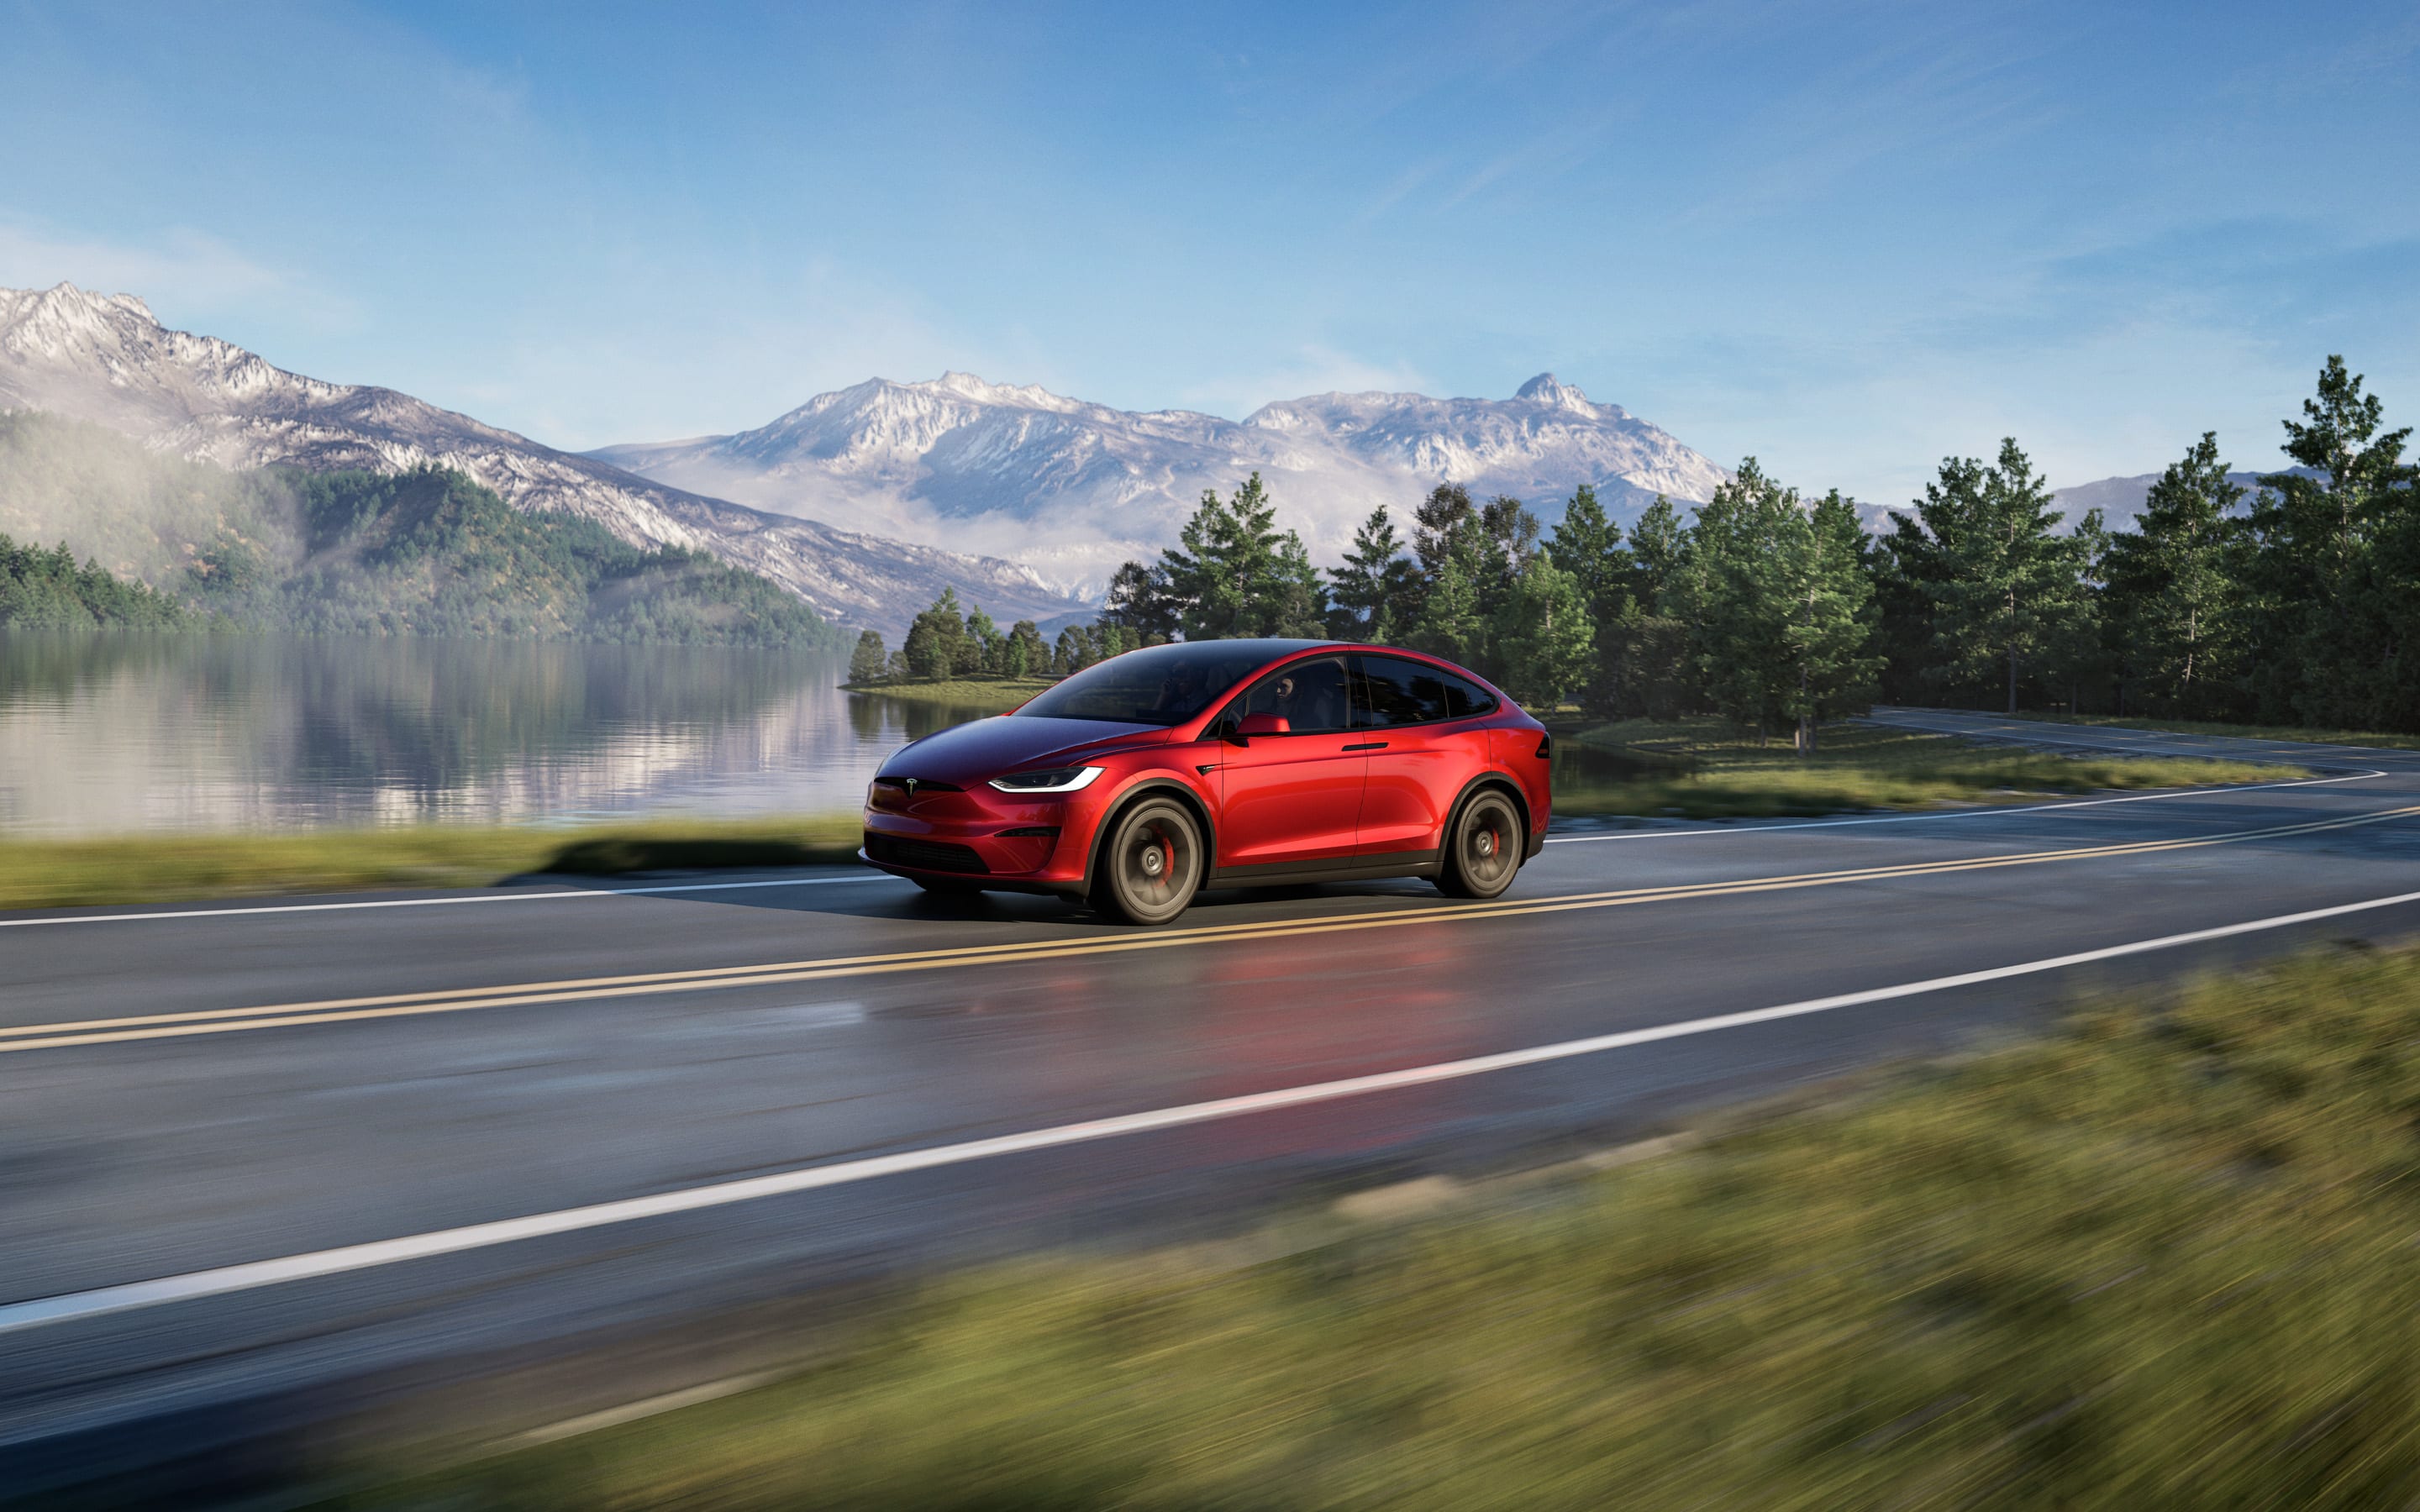 A red Model X Plaid accelerating down a highway with a lake and snow-covered mountains in the background